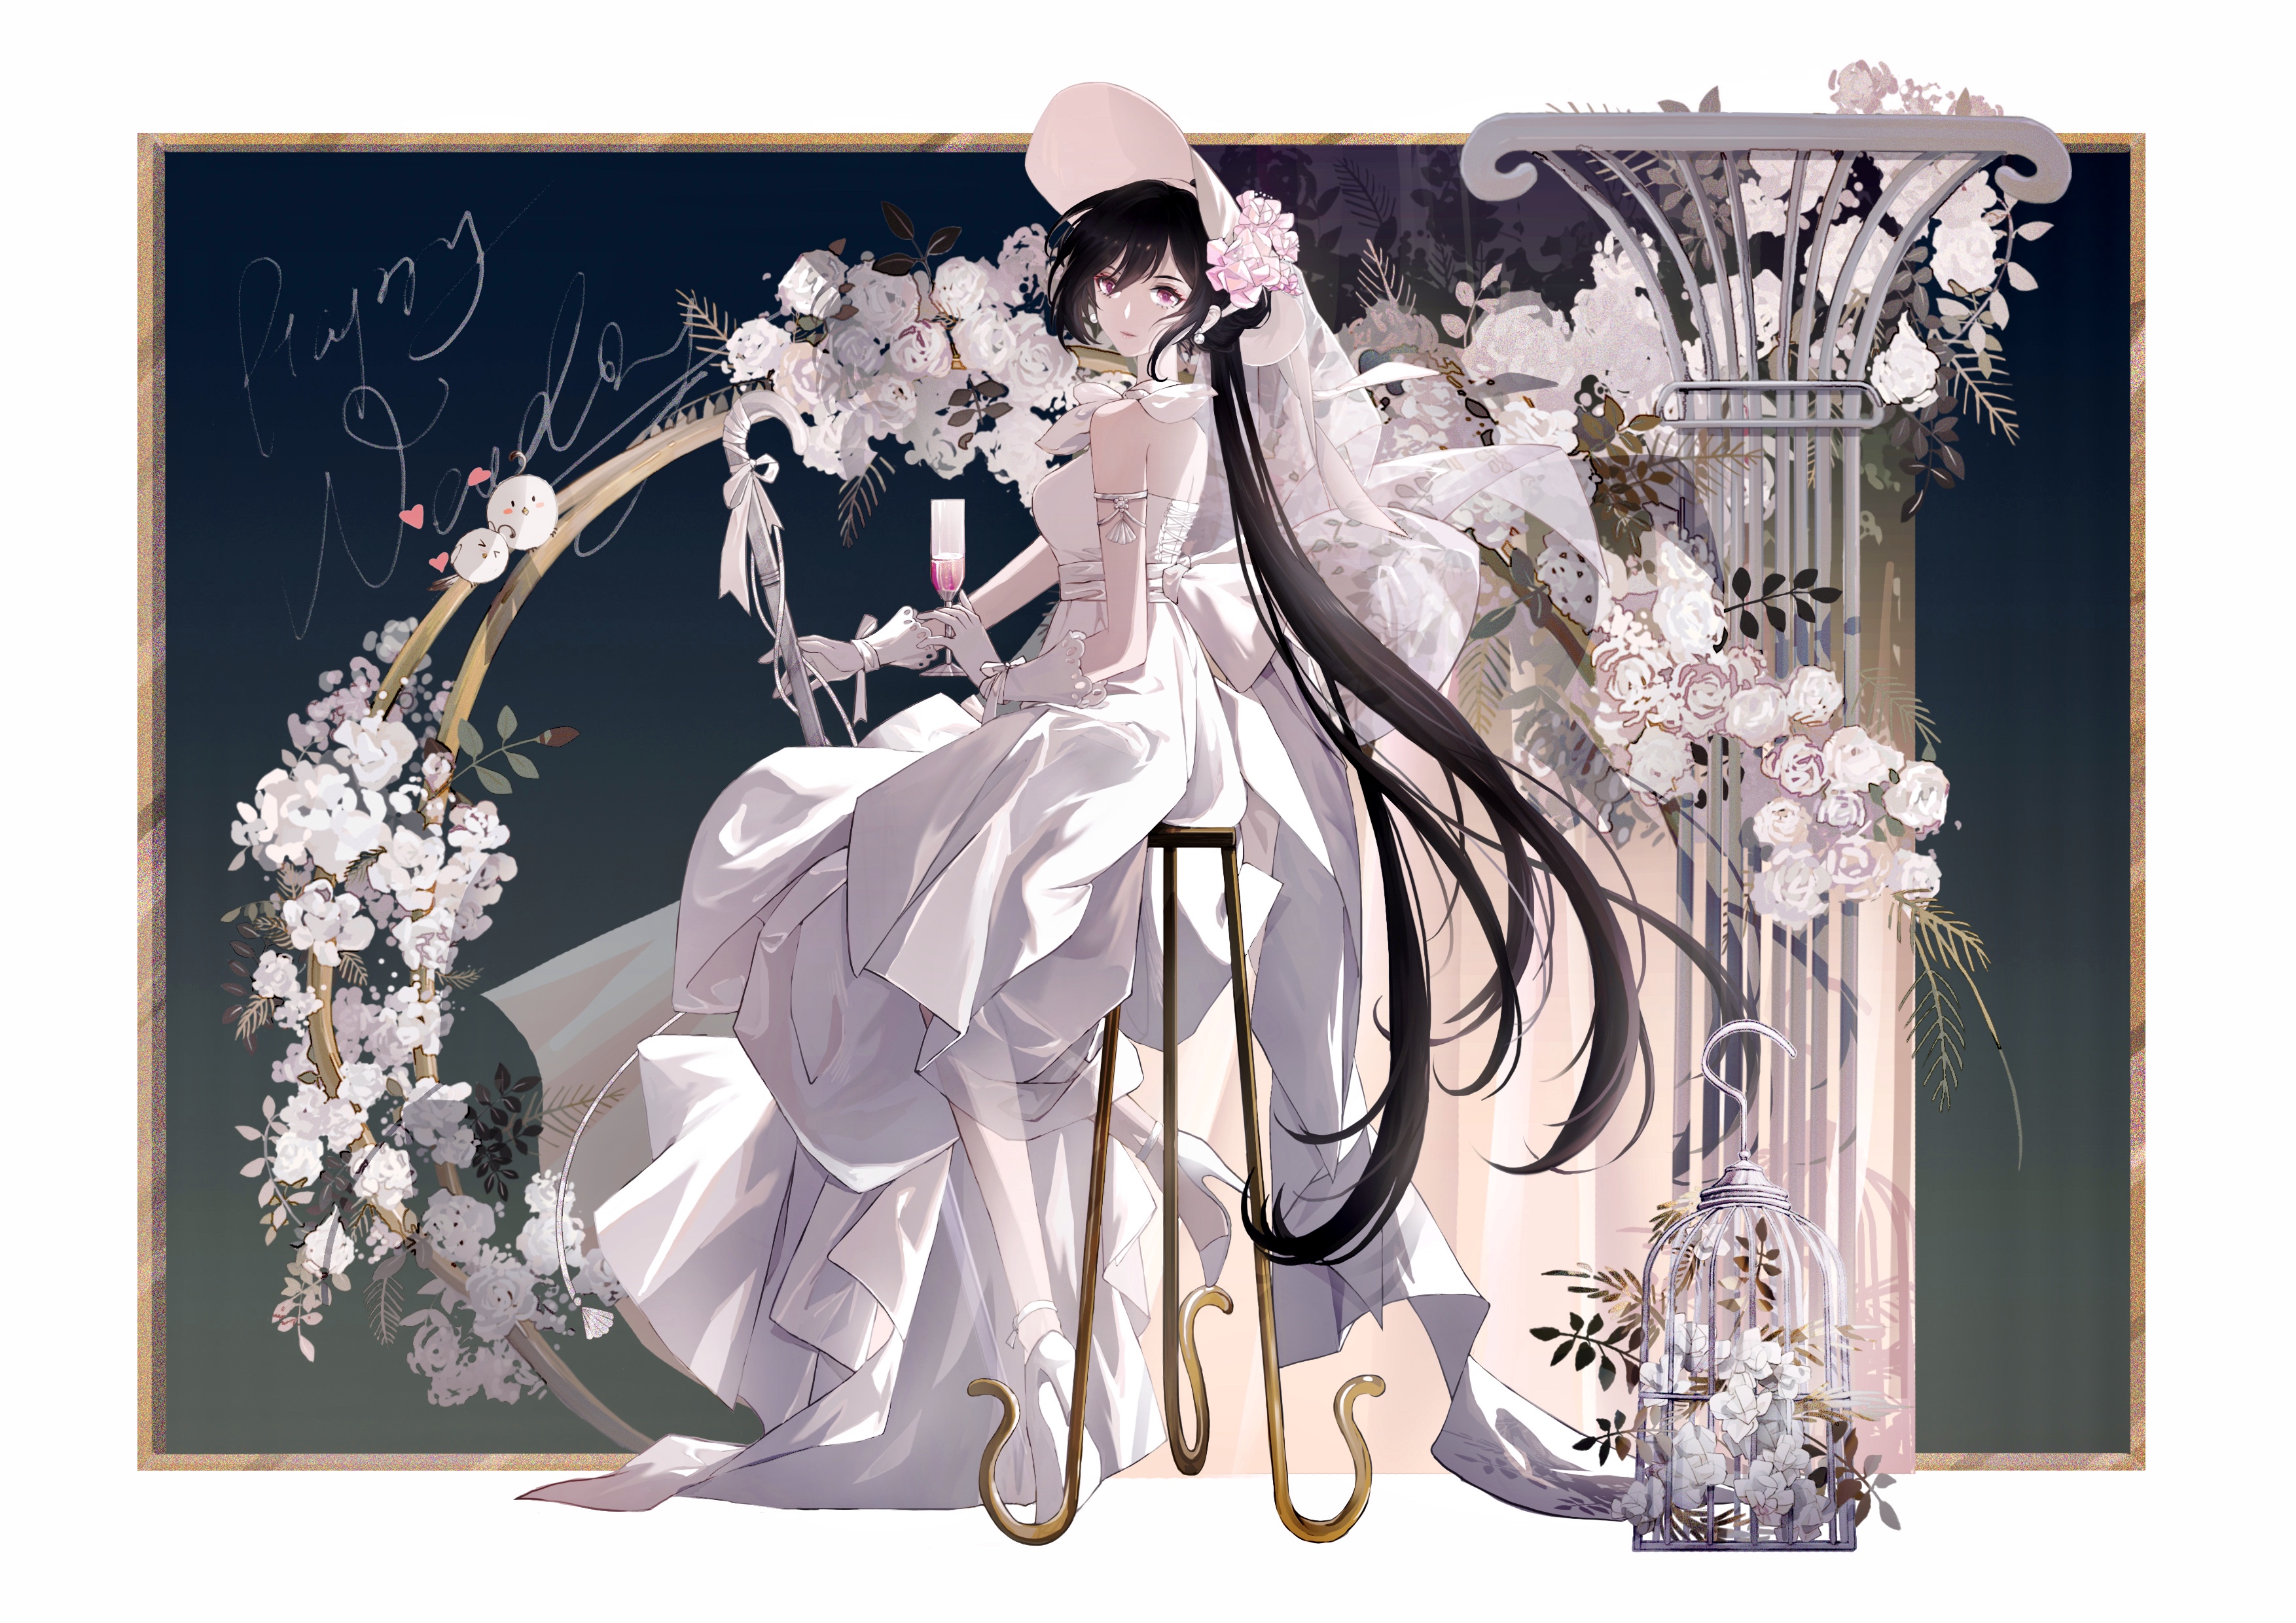 Anime 3508x2480 anime anime girls Pixiv long hair wine glass gloves flowers stools chair looking at viewer hat cages leaves purple eyes earring dark hair heels sitting dress